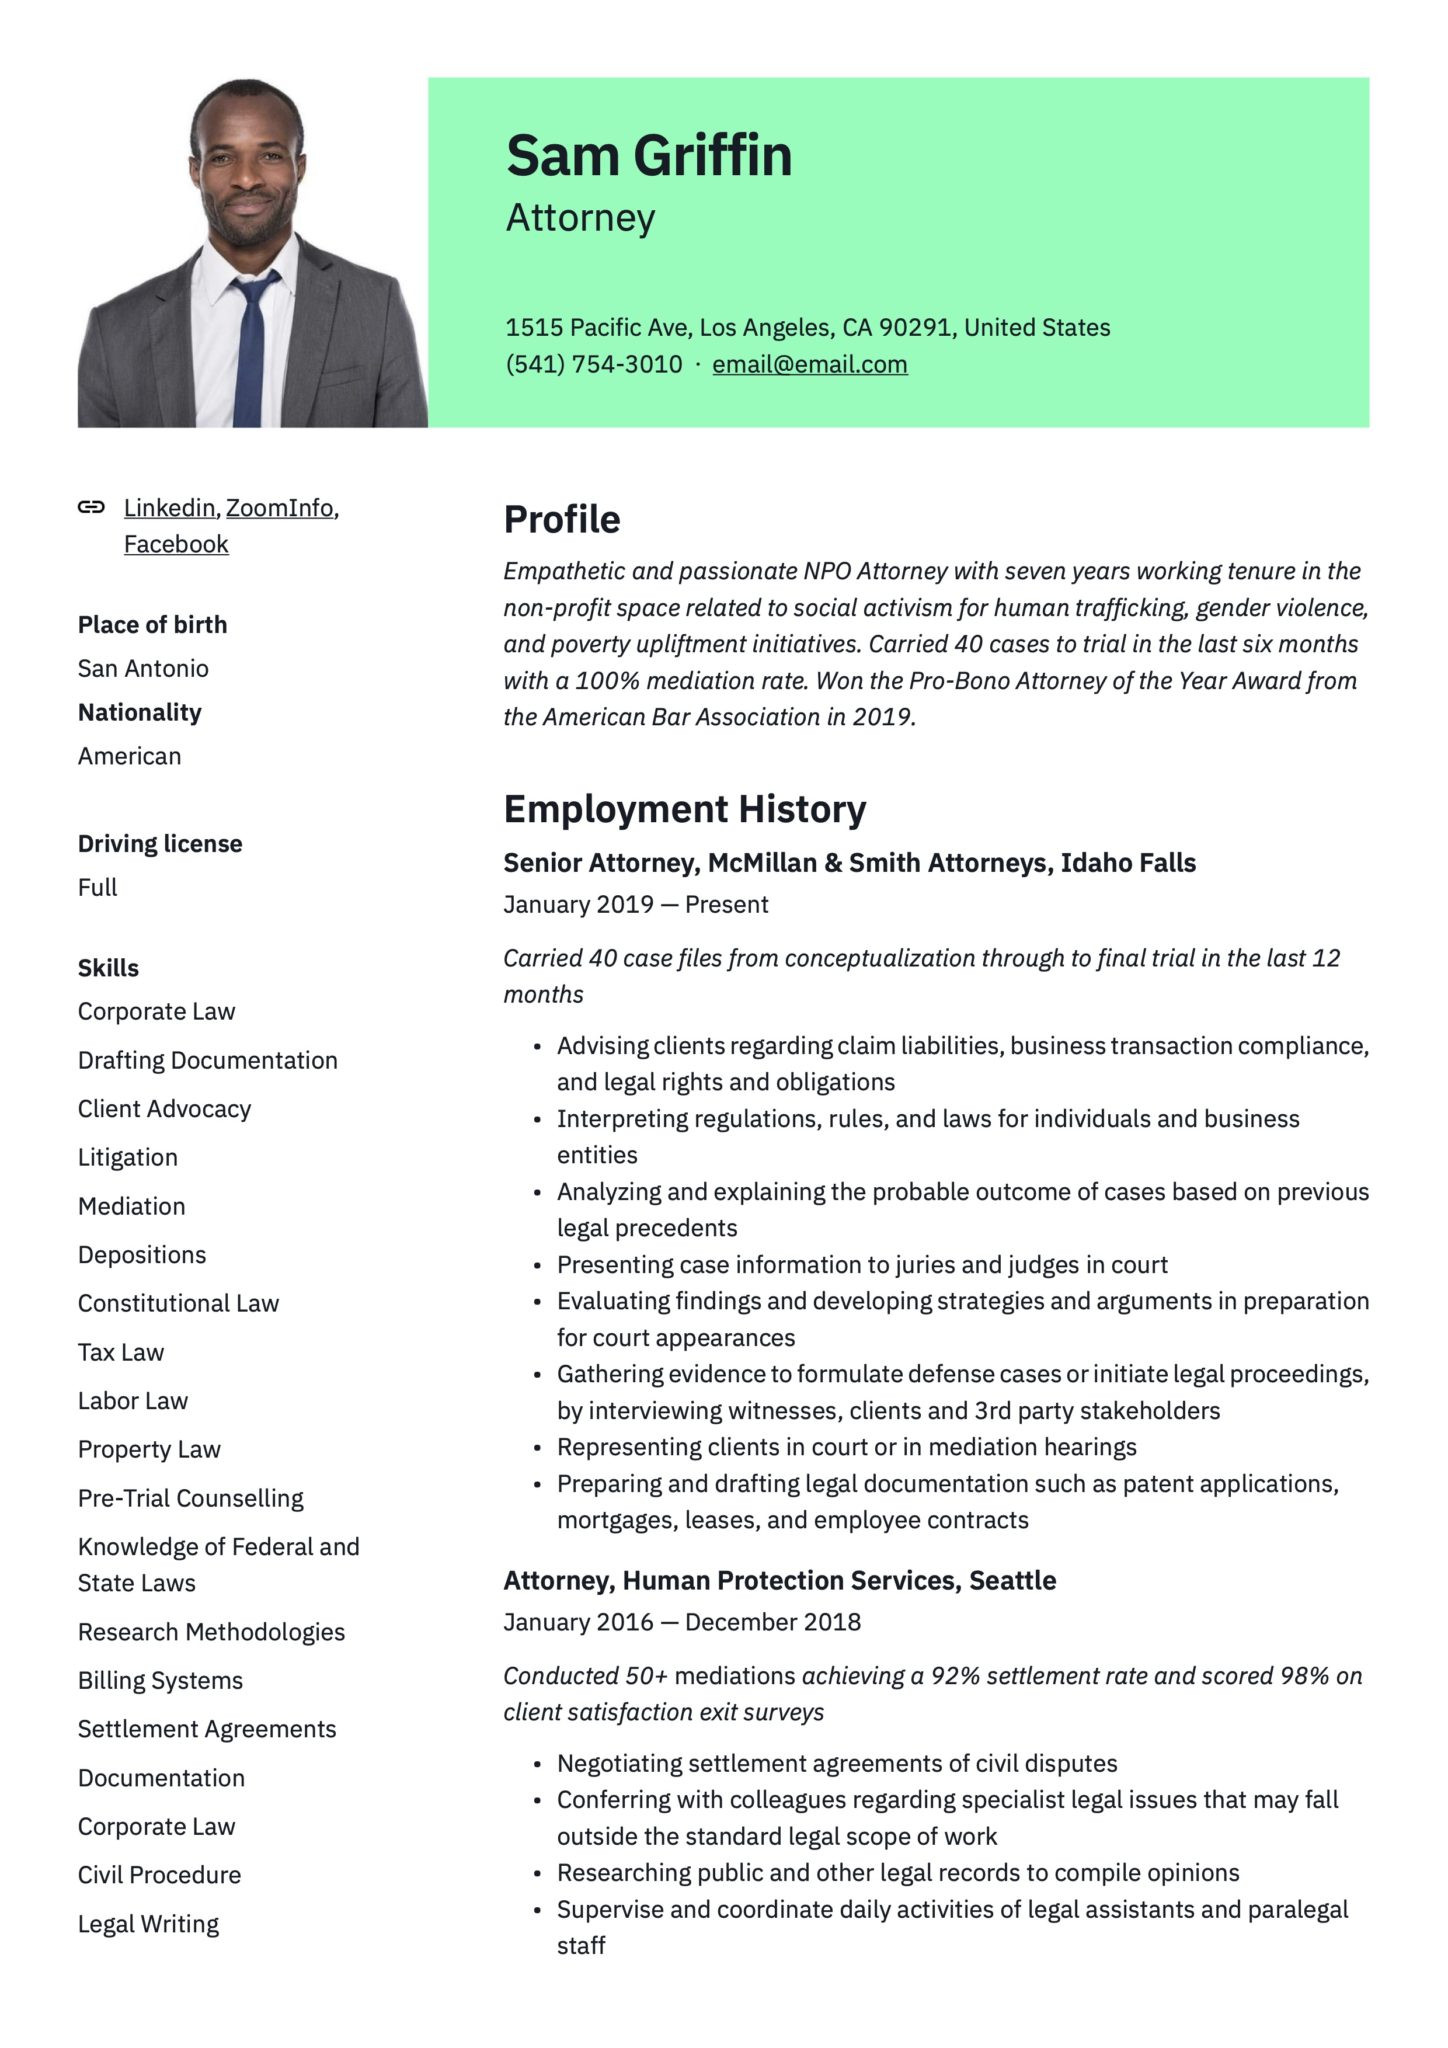 Sample Respresentative Matters for Lawyer Resume 18 attorney Resume Examples & Writing Guide Templates 2022